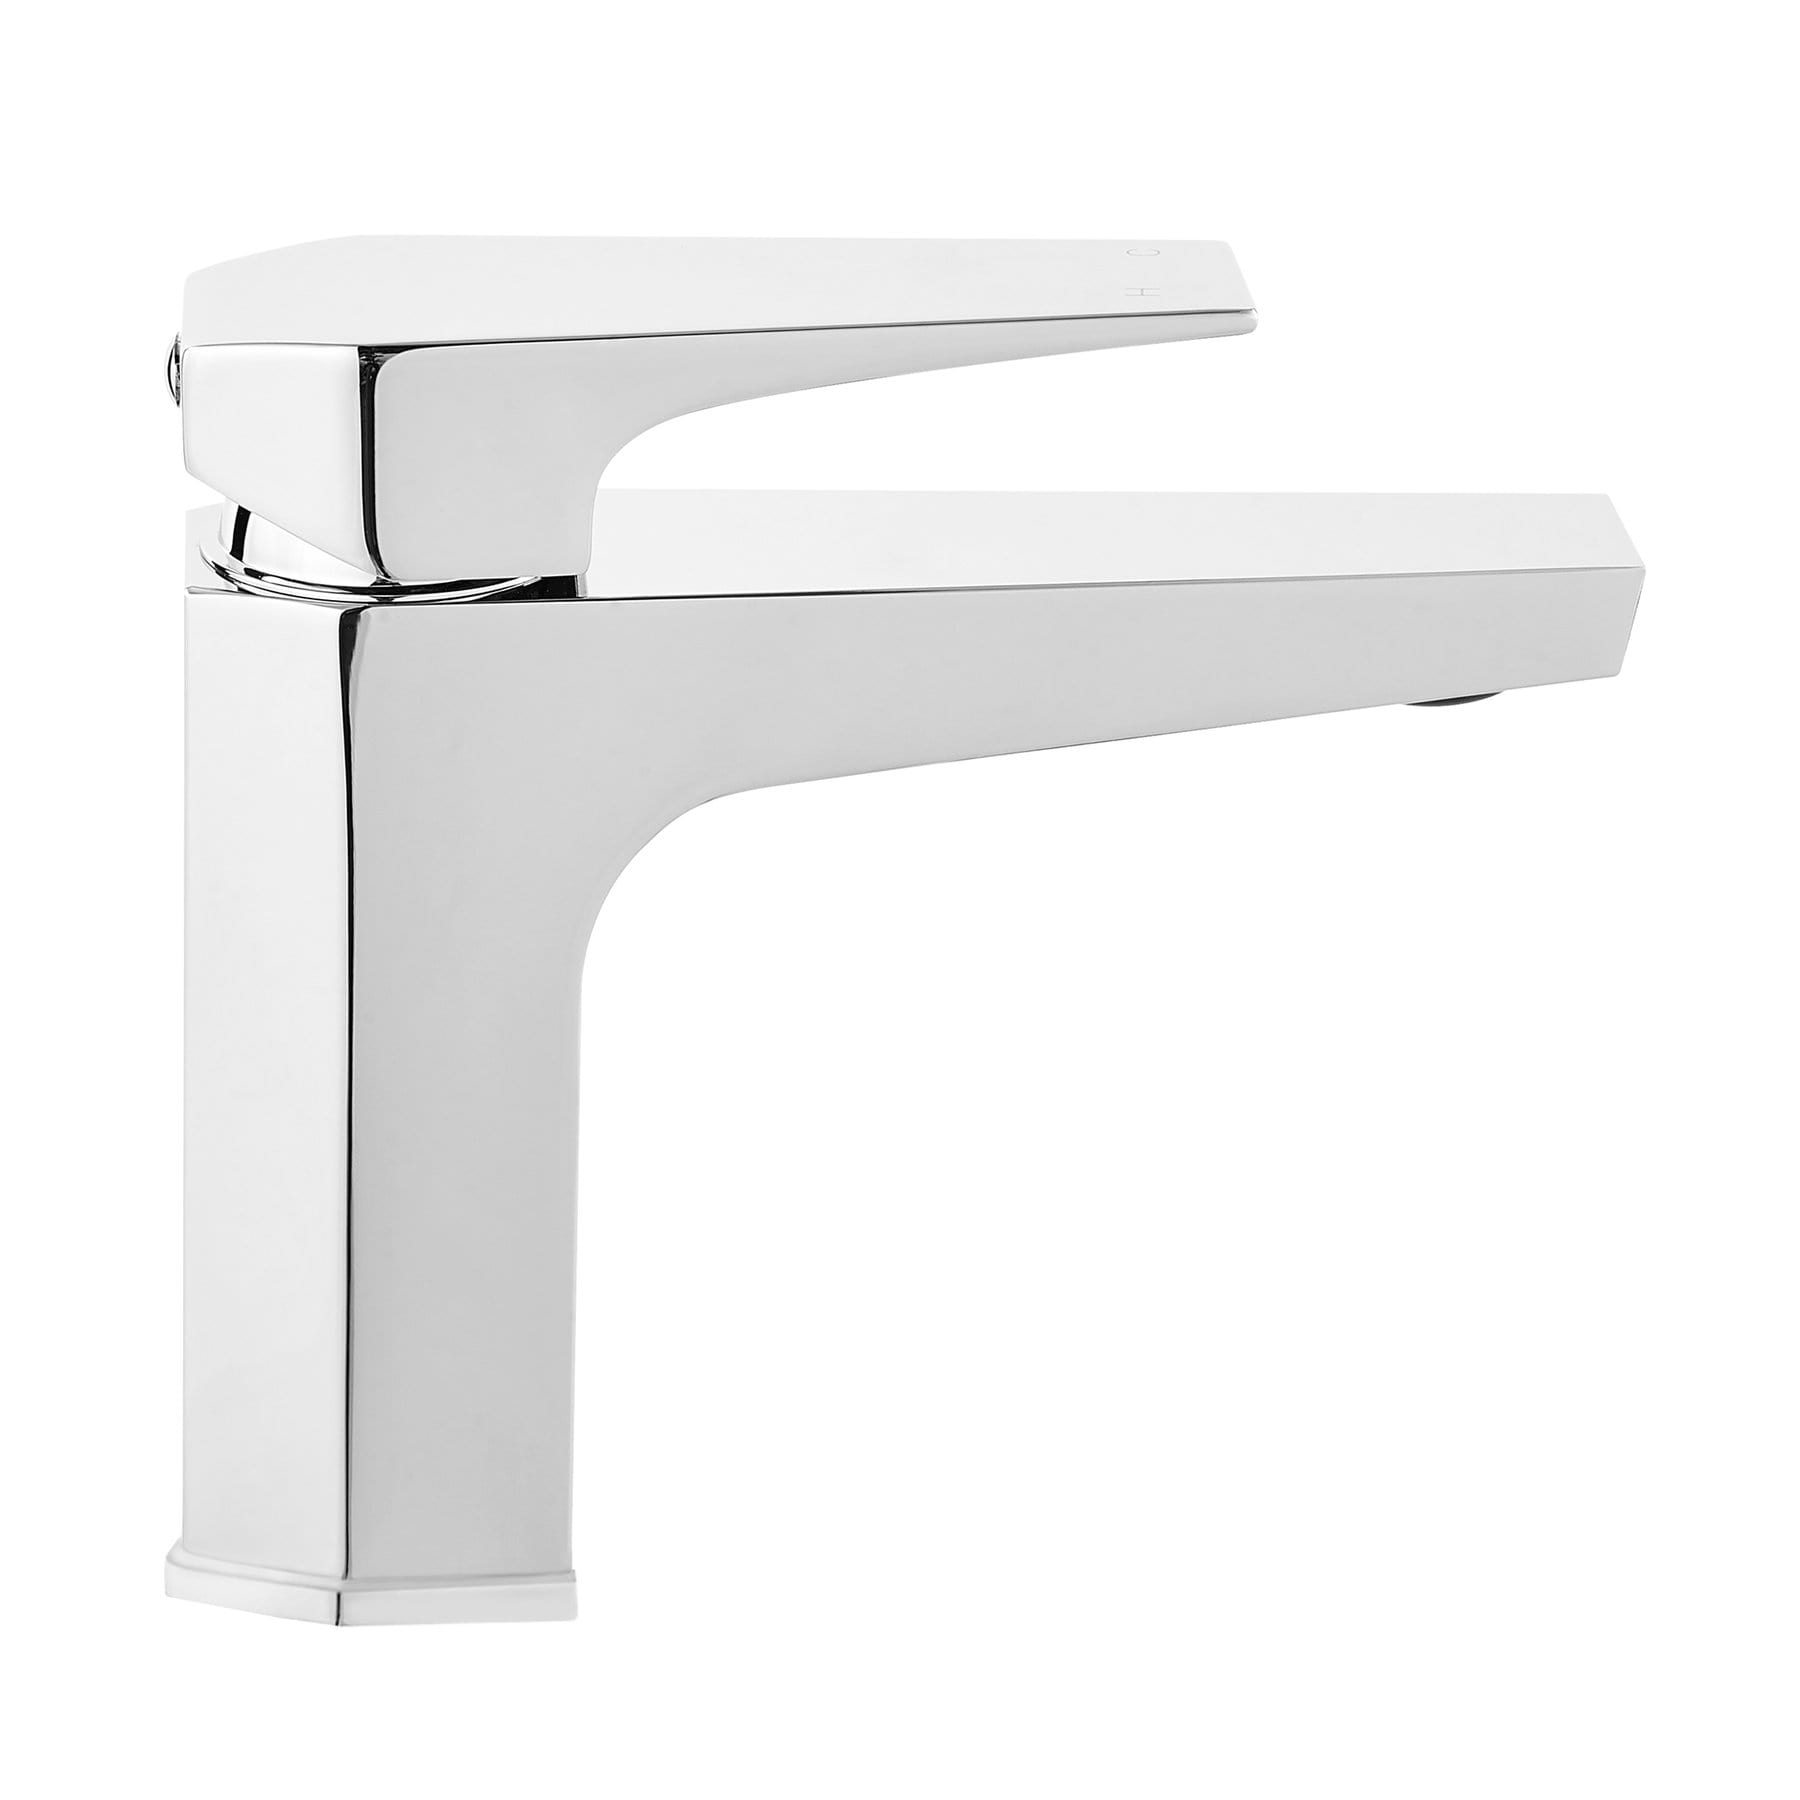 Swiss Madison Voltaire Single Hole, Single-Handle, Bathroom Faucet in Chrome - SM-BF40C - Molaix723552143819AccessoriesSM-BF40C